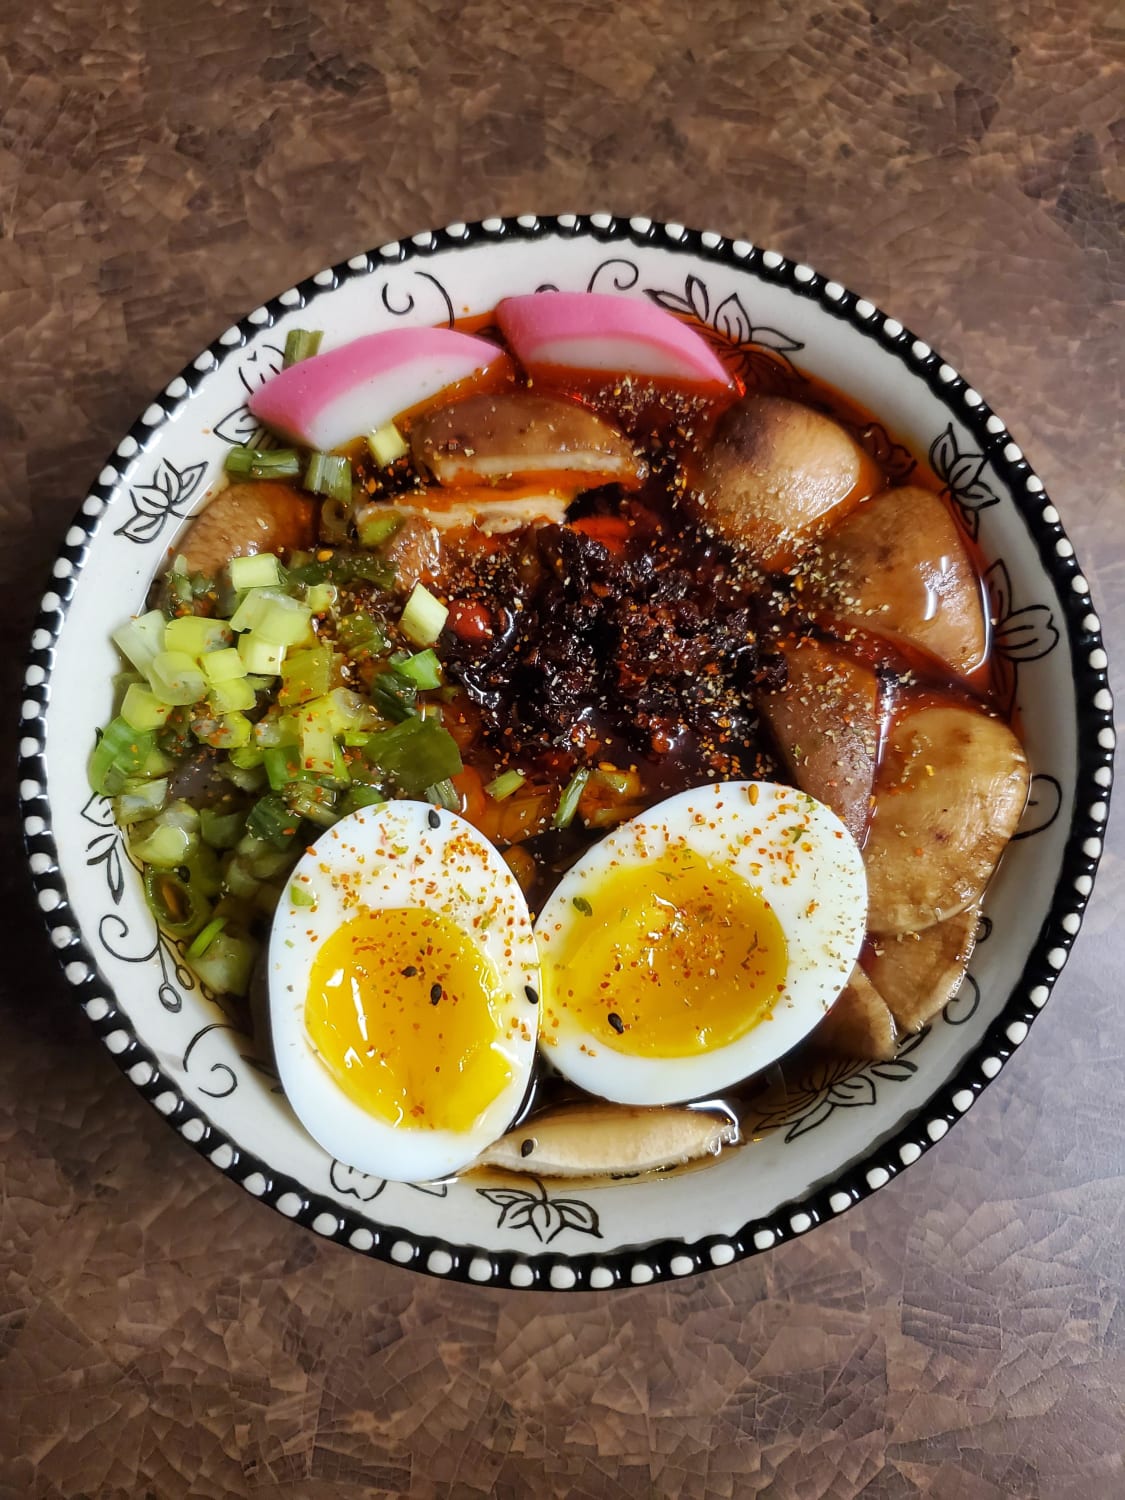 Tried making a relatively low-carb ramen. Contains: tsuyu base, shirataki noodles, egg, kamaboko, green onion, shiitake, fried chili in oil, and shichimi pepper.